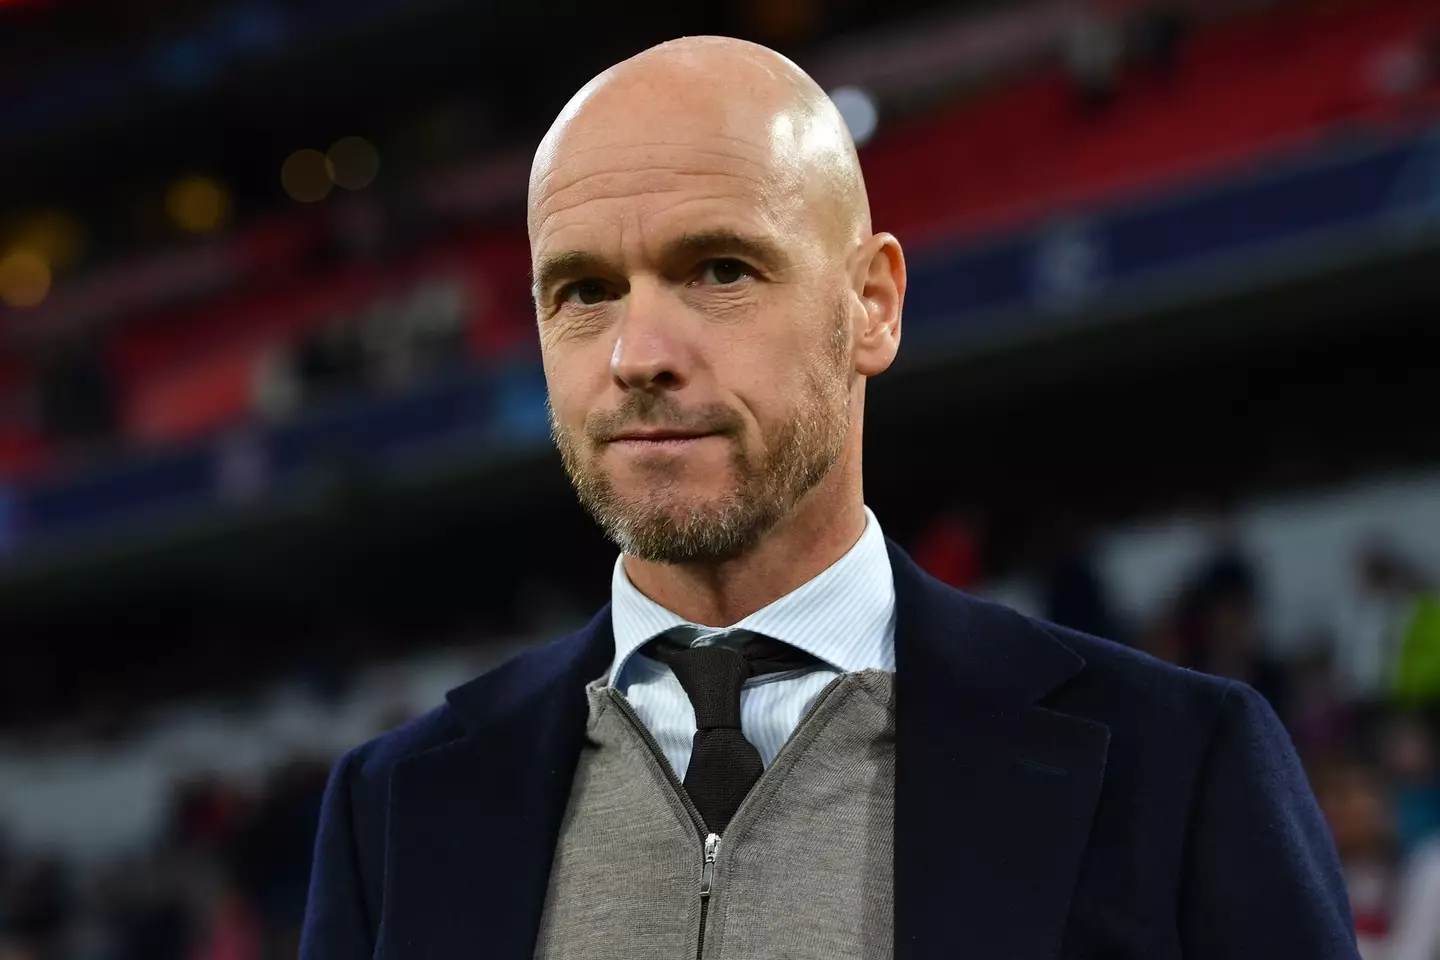 Erik ten Hag will be looking to bring success back to Old Trafford. Image